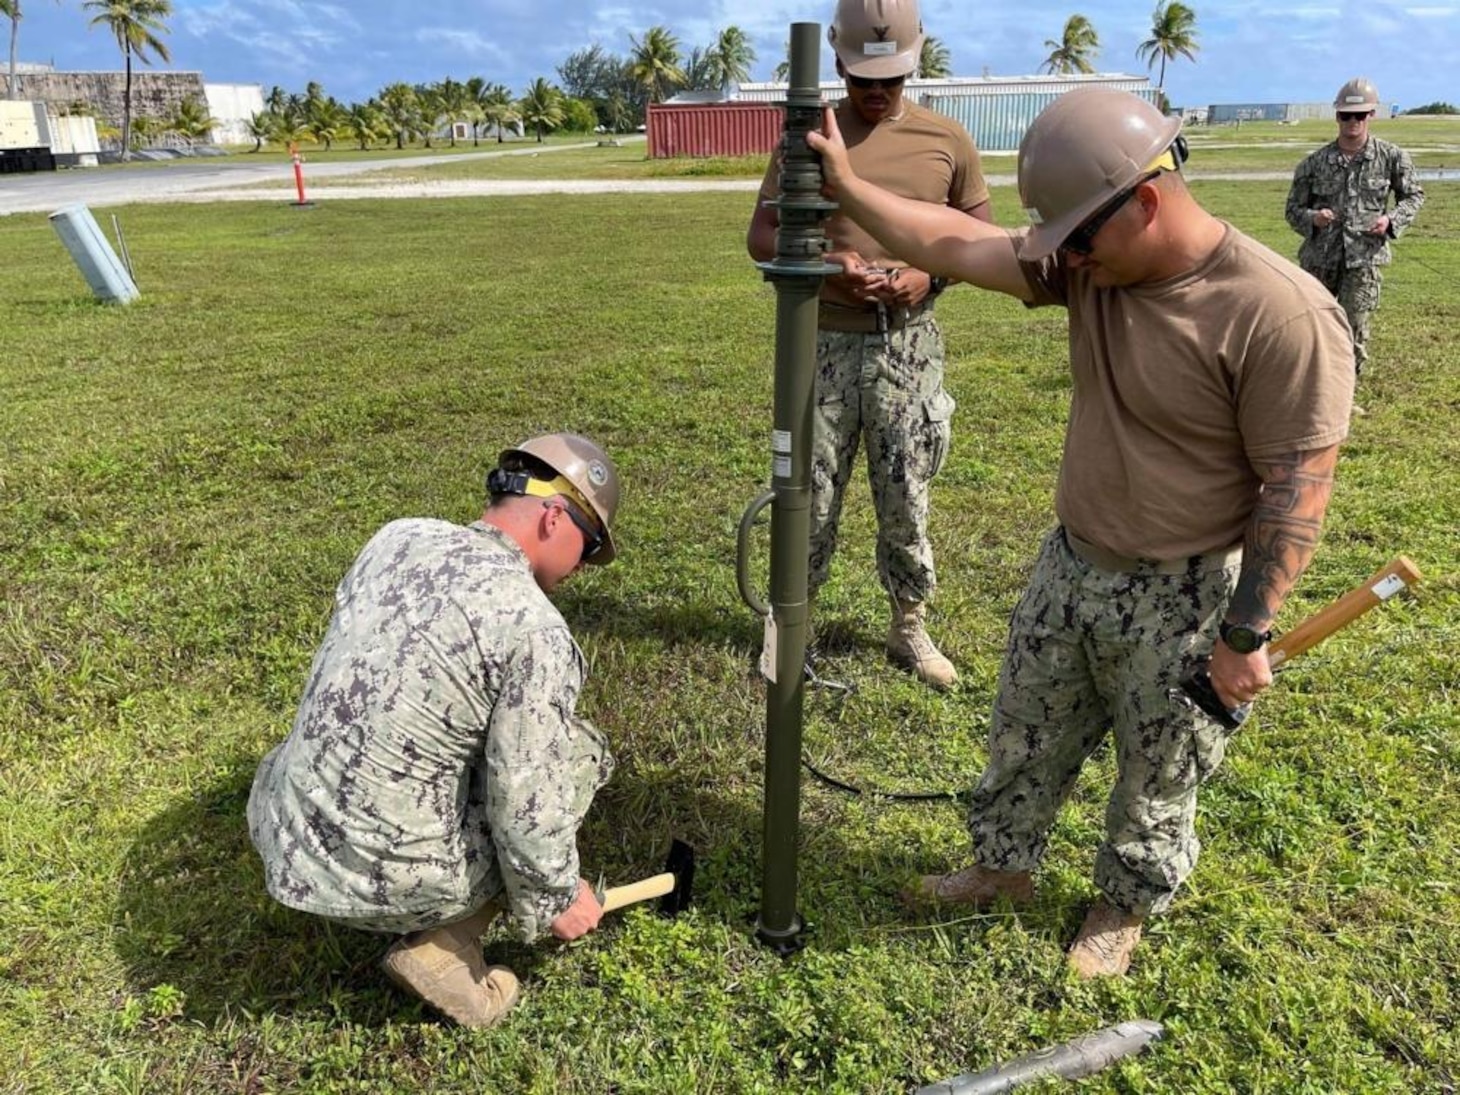 211122-N-CE120-1005 KWAJALEIN, Marshall Islands (Nov. 14, 2021) U.S. Navy Seabees with Naval Mobile Construction Battalion (NMCB) 5 set up an antenna during a joint Communications Exercise at Kwajalein, Marshall Islands. The U.S. Navy Seabees assigned to NMCB-5 are deployed to the U.S. 7th Fleet area of operations, supporting a free and open Indo-Pacific, strengthening their network of alliances and partnerships, and providing general engineering and civil support to joint operational forces. Homeported out of Port Hueneme, California, NMCB-5 has 13 detail sites deployed throughout the U.S. and Indo-Pacific area of operations. (U.S. Navy photo by Equipment Operator 2nd Class Brandon Blevins)